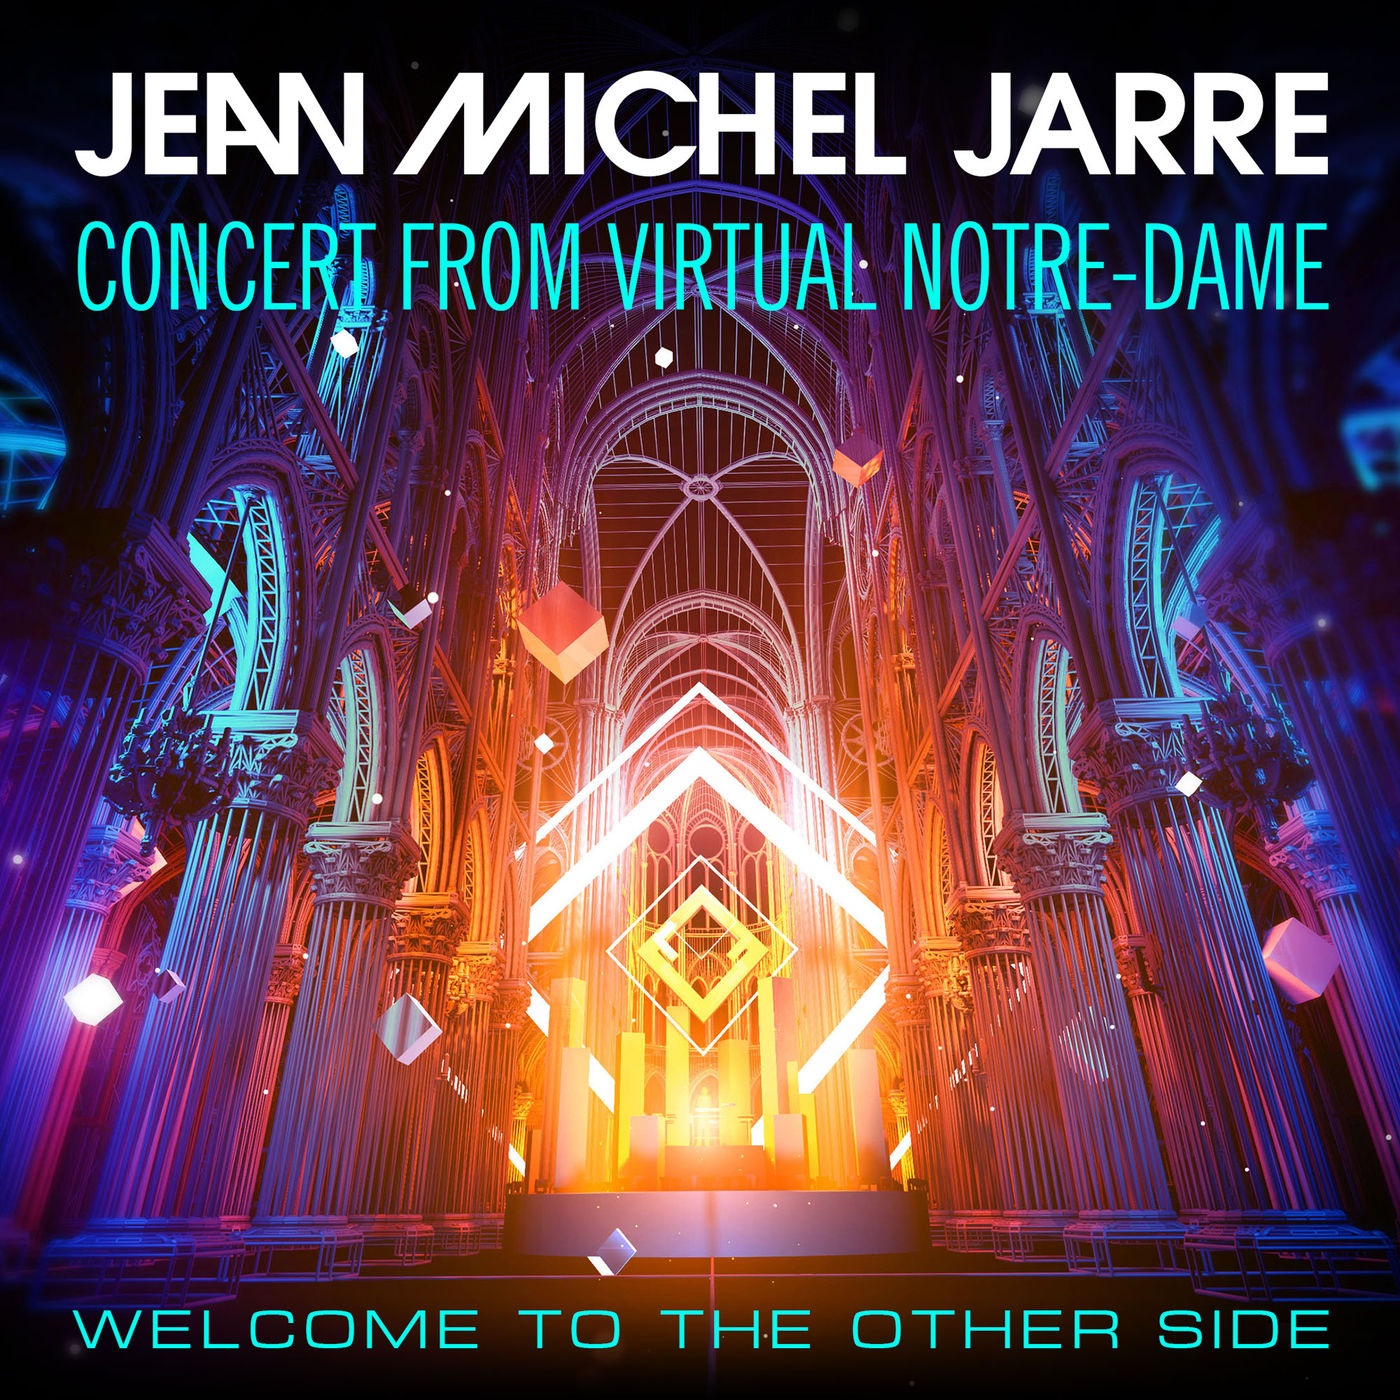 Jean Michel Jarre – Welcome To The Other Side (Concert From Virtual Notre-Dame) (2021) [FLAC 24bit/48kHz]